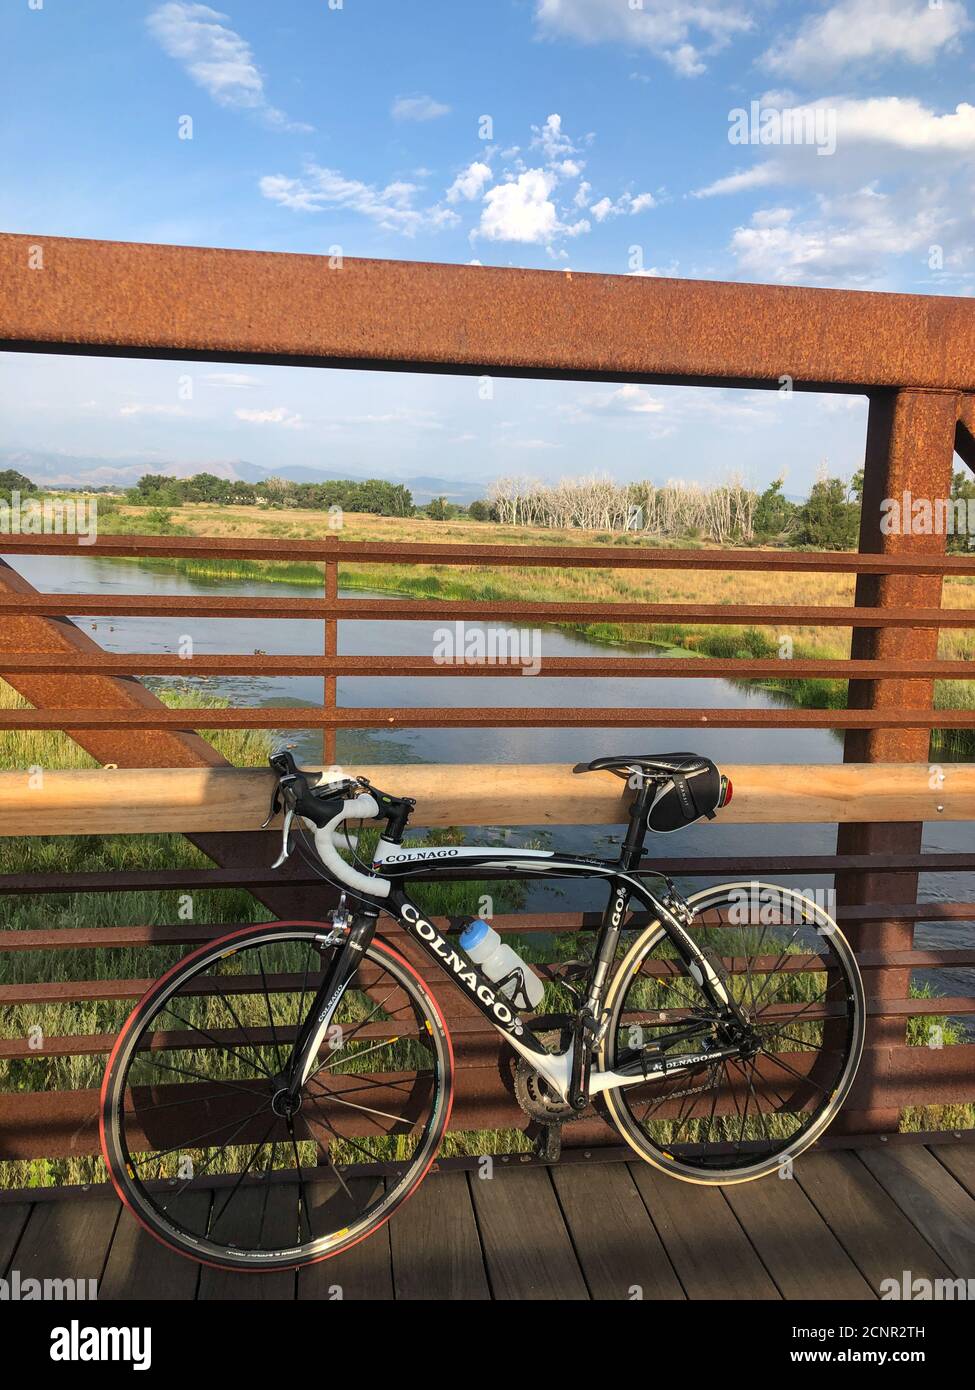 Riding my favoriteConalgo road bike to Sandstone Ranch park near Longmont, Colorado. Overlooking river and grassland at early morning. Stock Photo